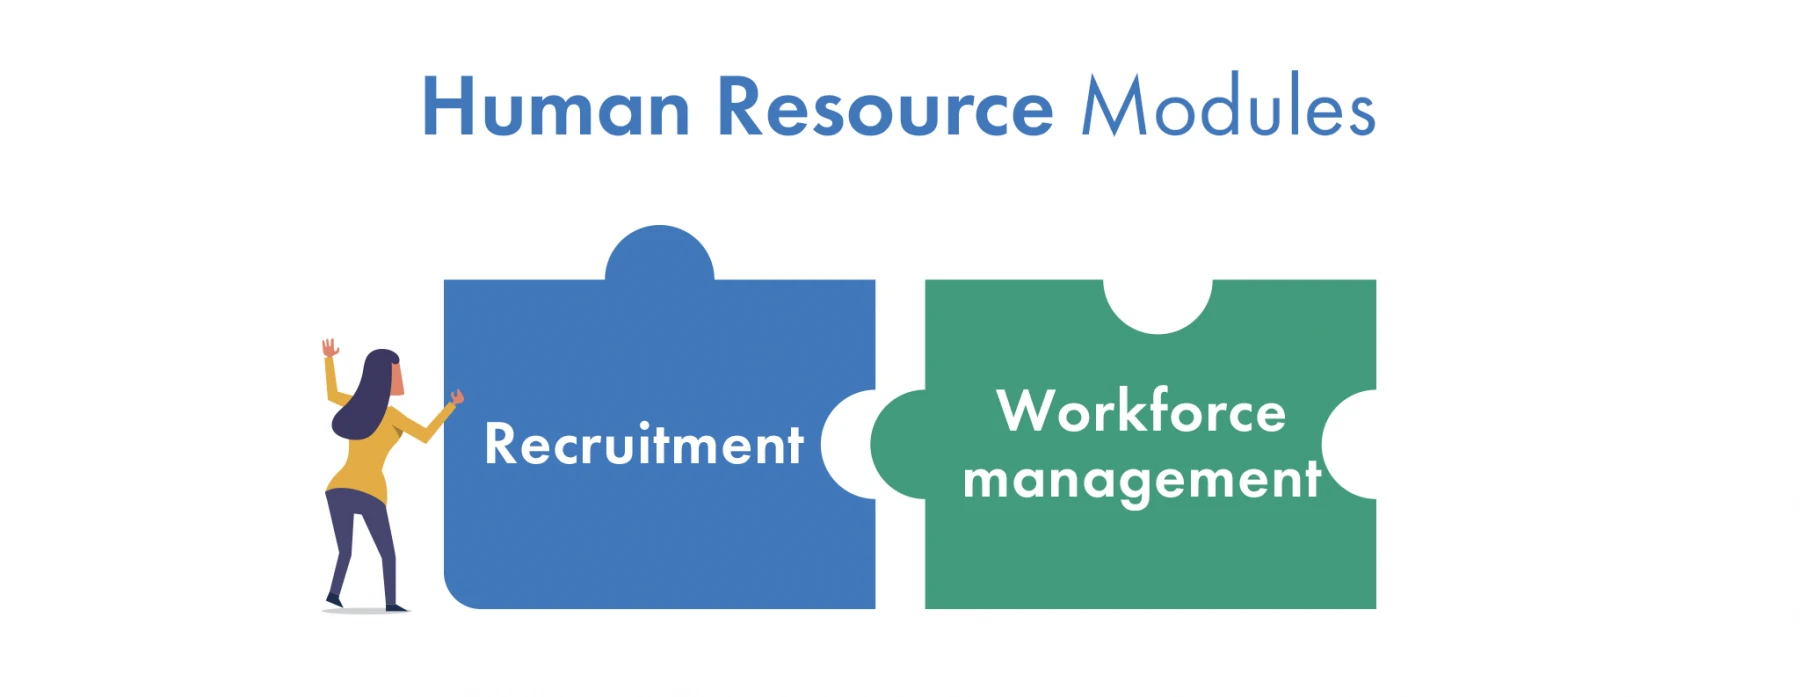 Human Resource components of the modular system